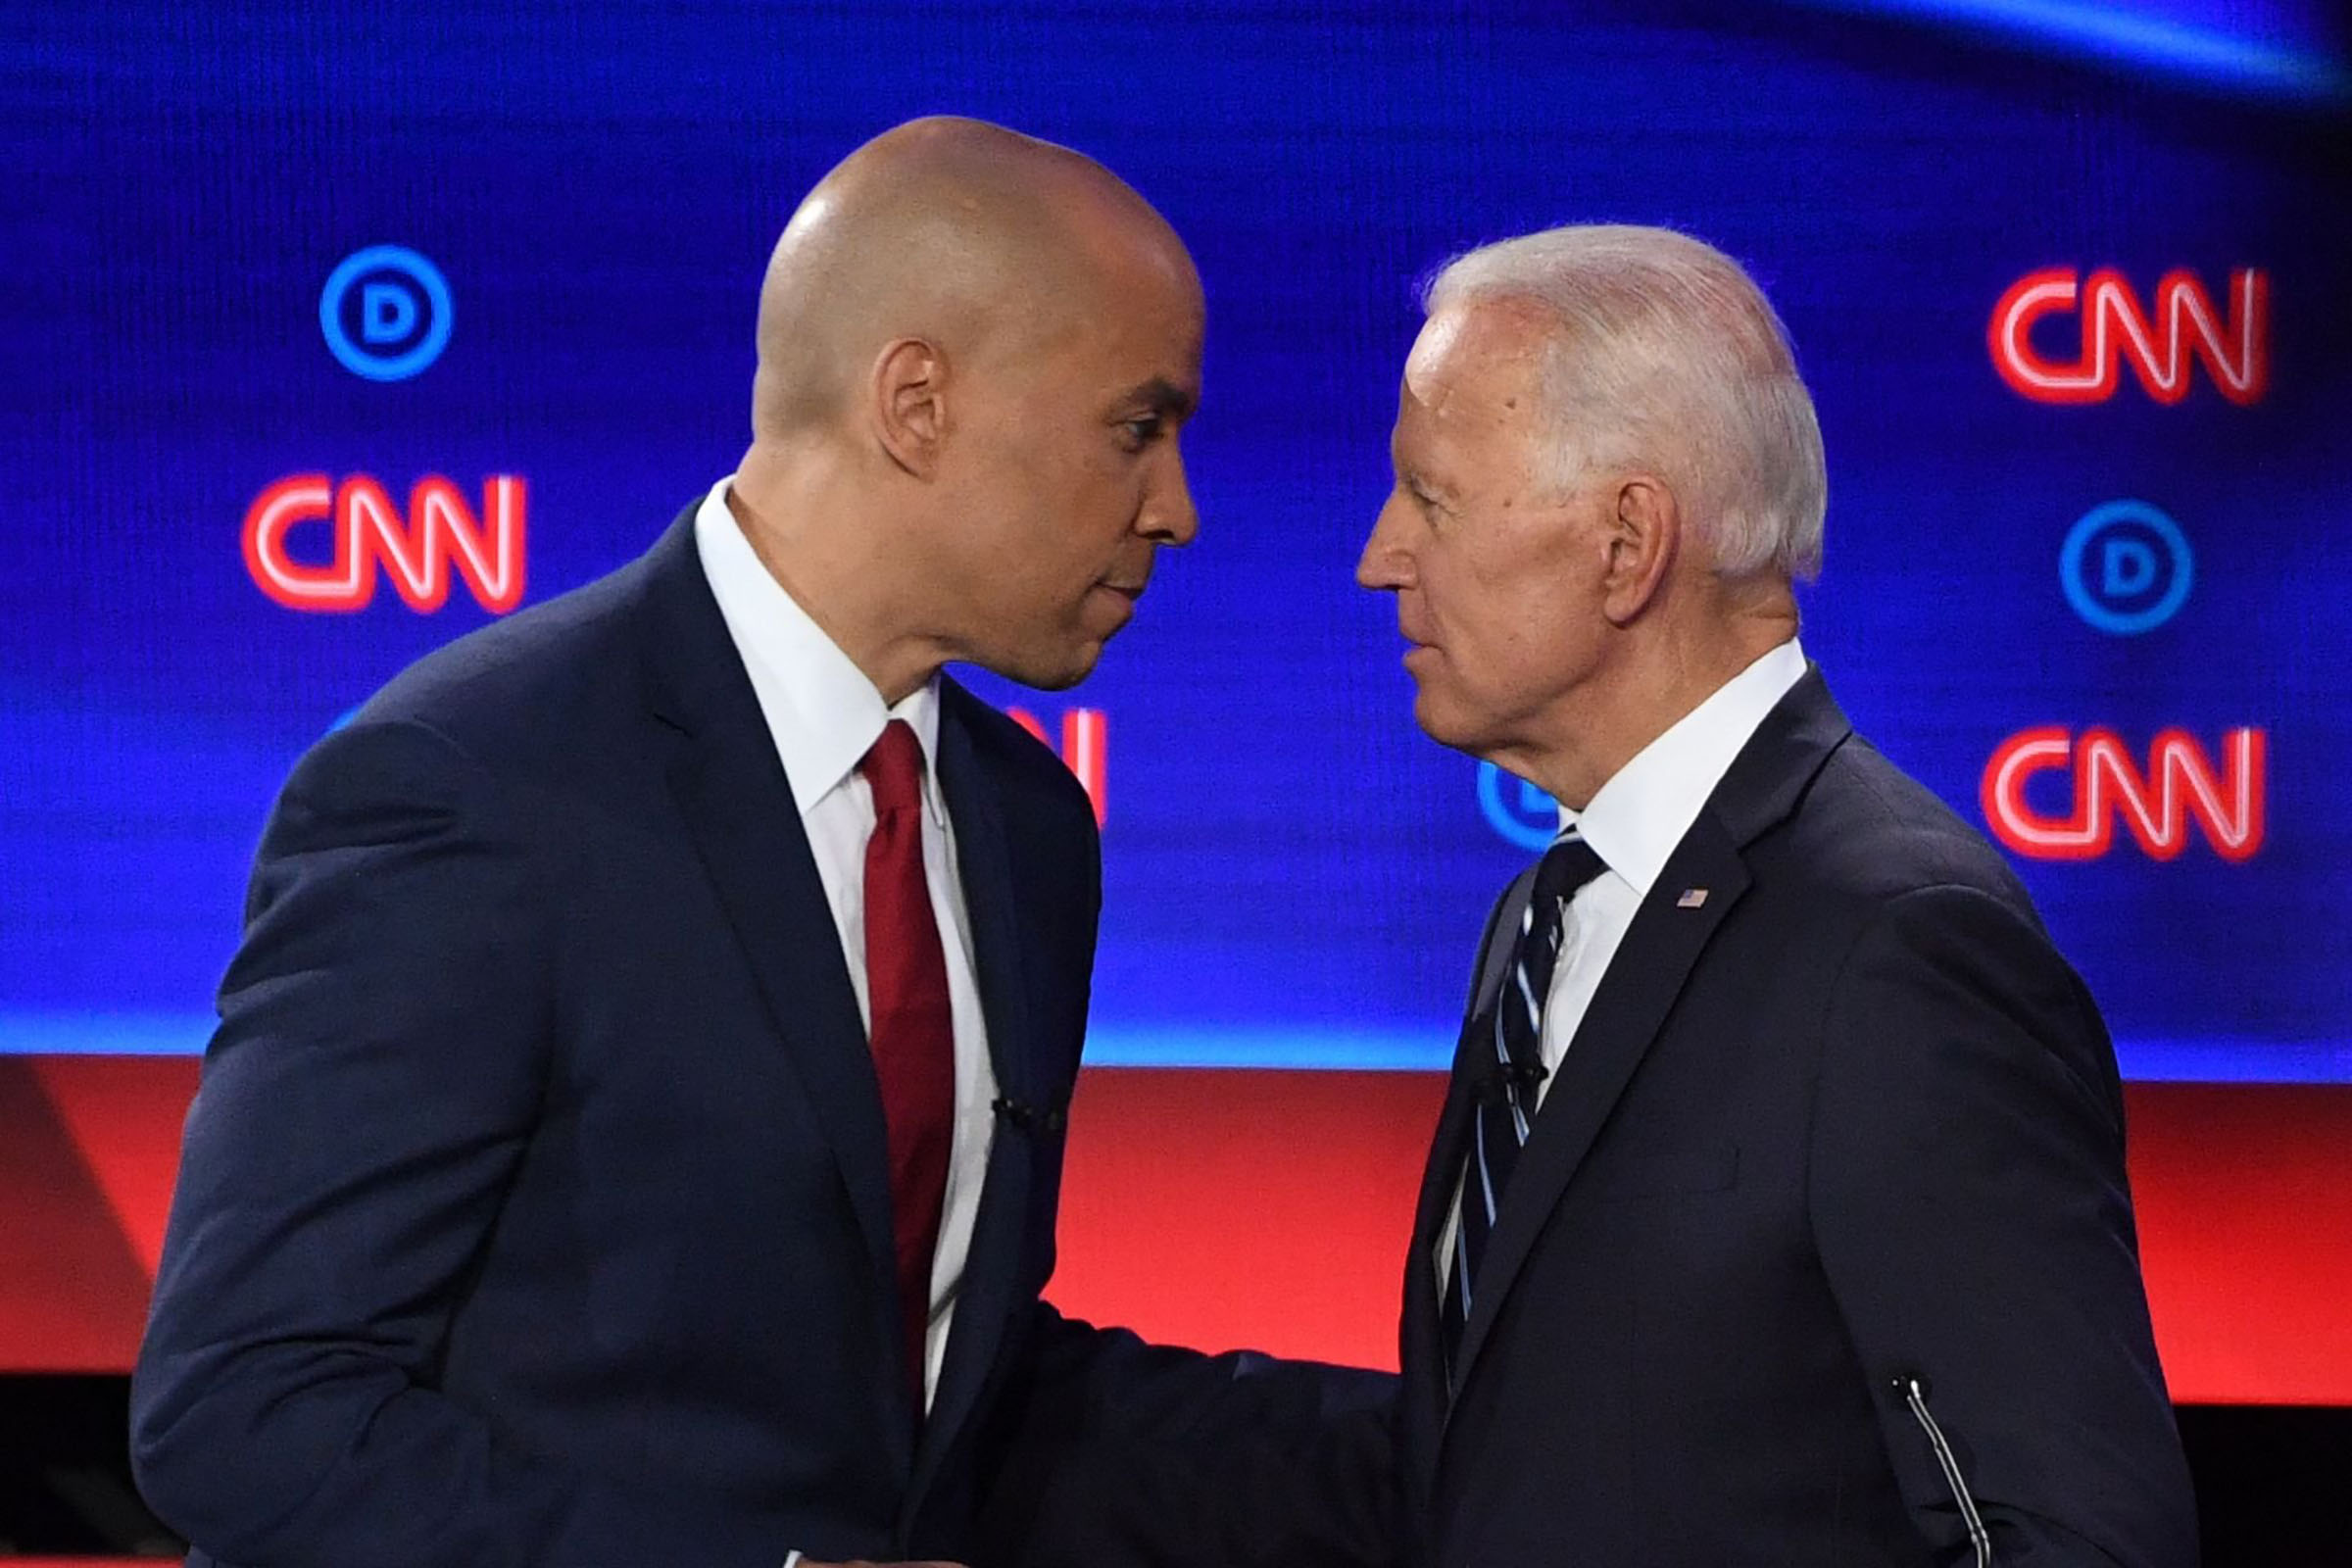 Democratic presidential hopefuls Former Vice President Joe Biden (R) and US Senator from New Jersey Cory Booker chat during a break in the second round of the second Democratic primary debate of the 2020 presidential campaign season hosted by CNN at the Fox Theatre in Detroit, Michigan on July 31, 2019. (Jim Watson—AFP/Getty Images)